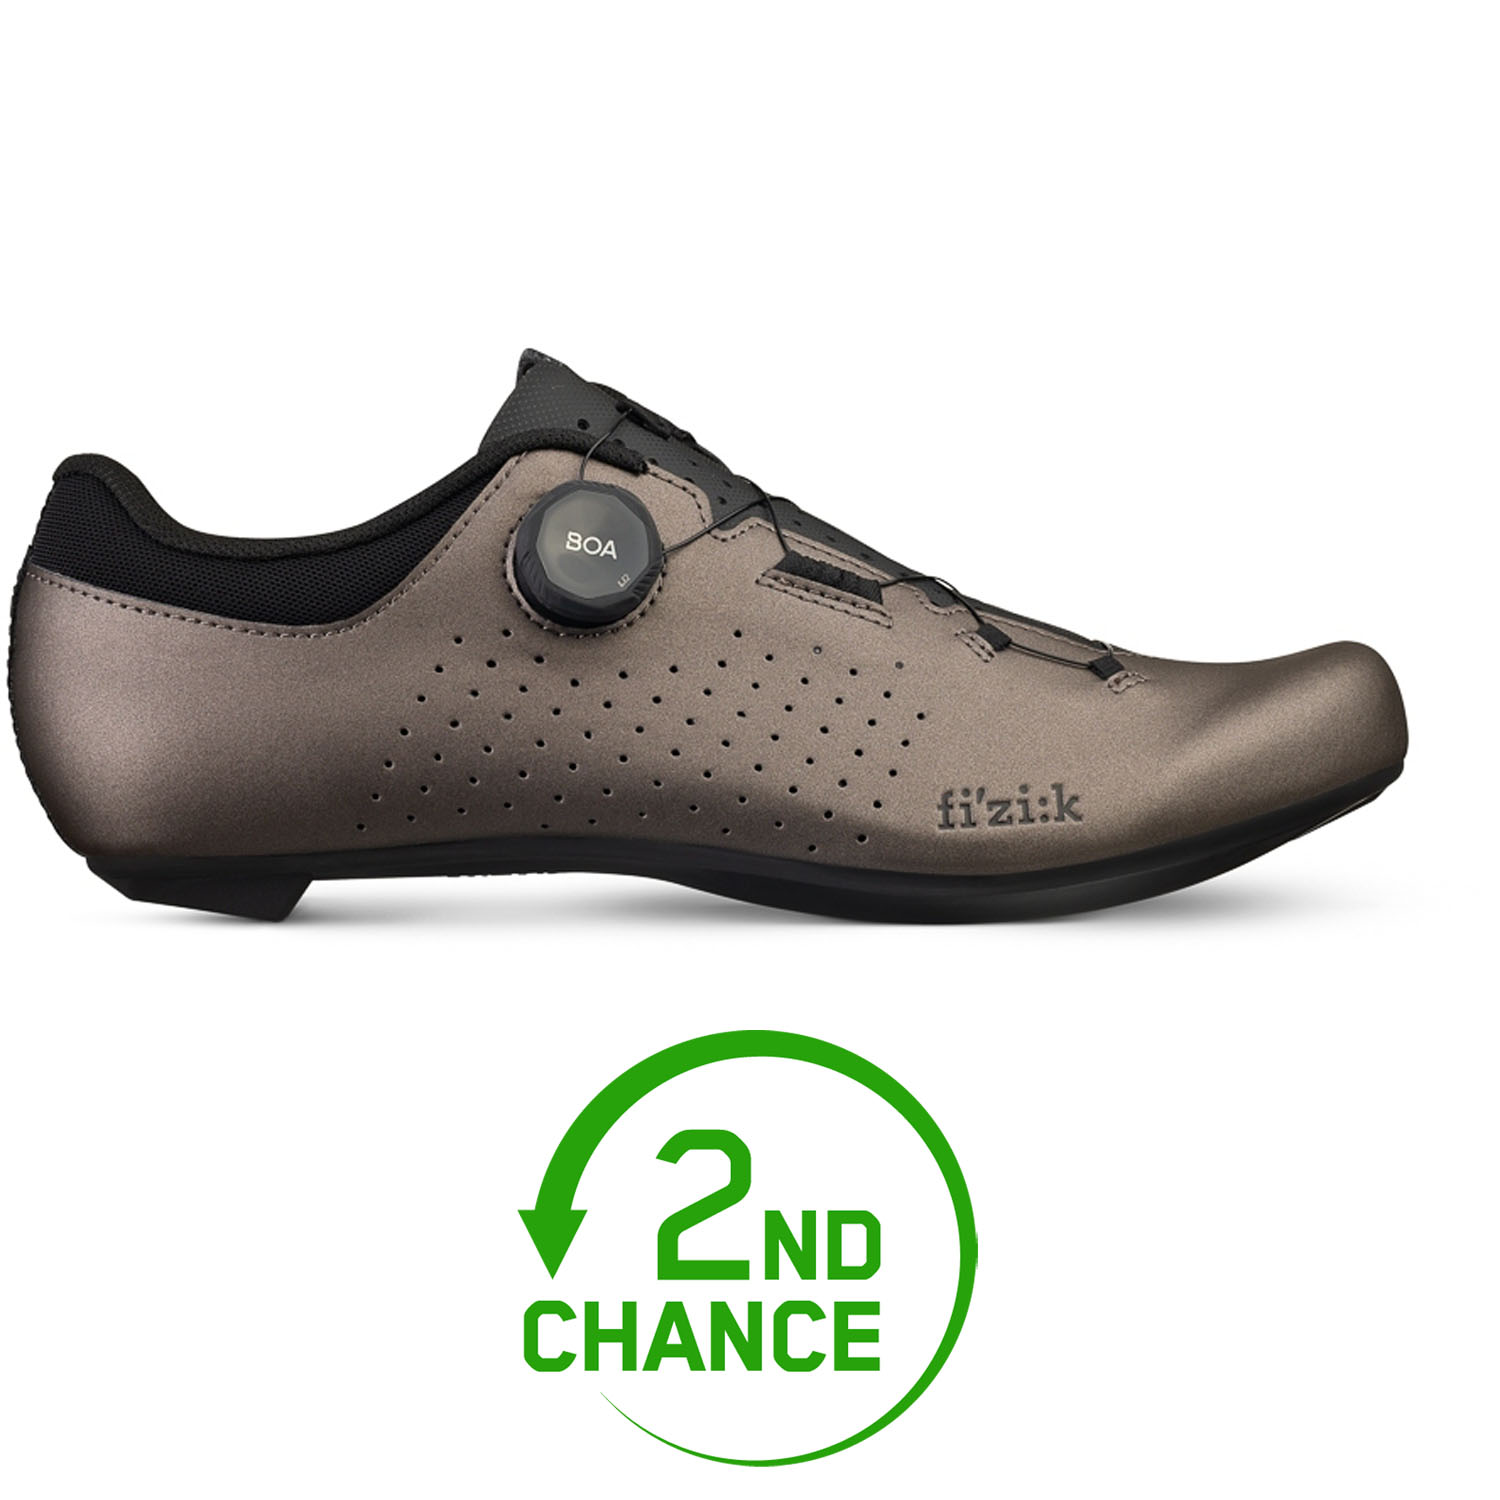 Picture of Fizik Vento Omna Road Shoes Unisex - gunmetal/black - 2nd Choice